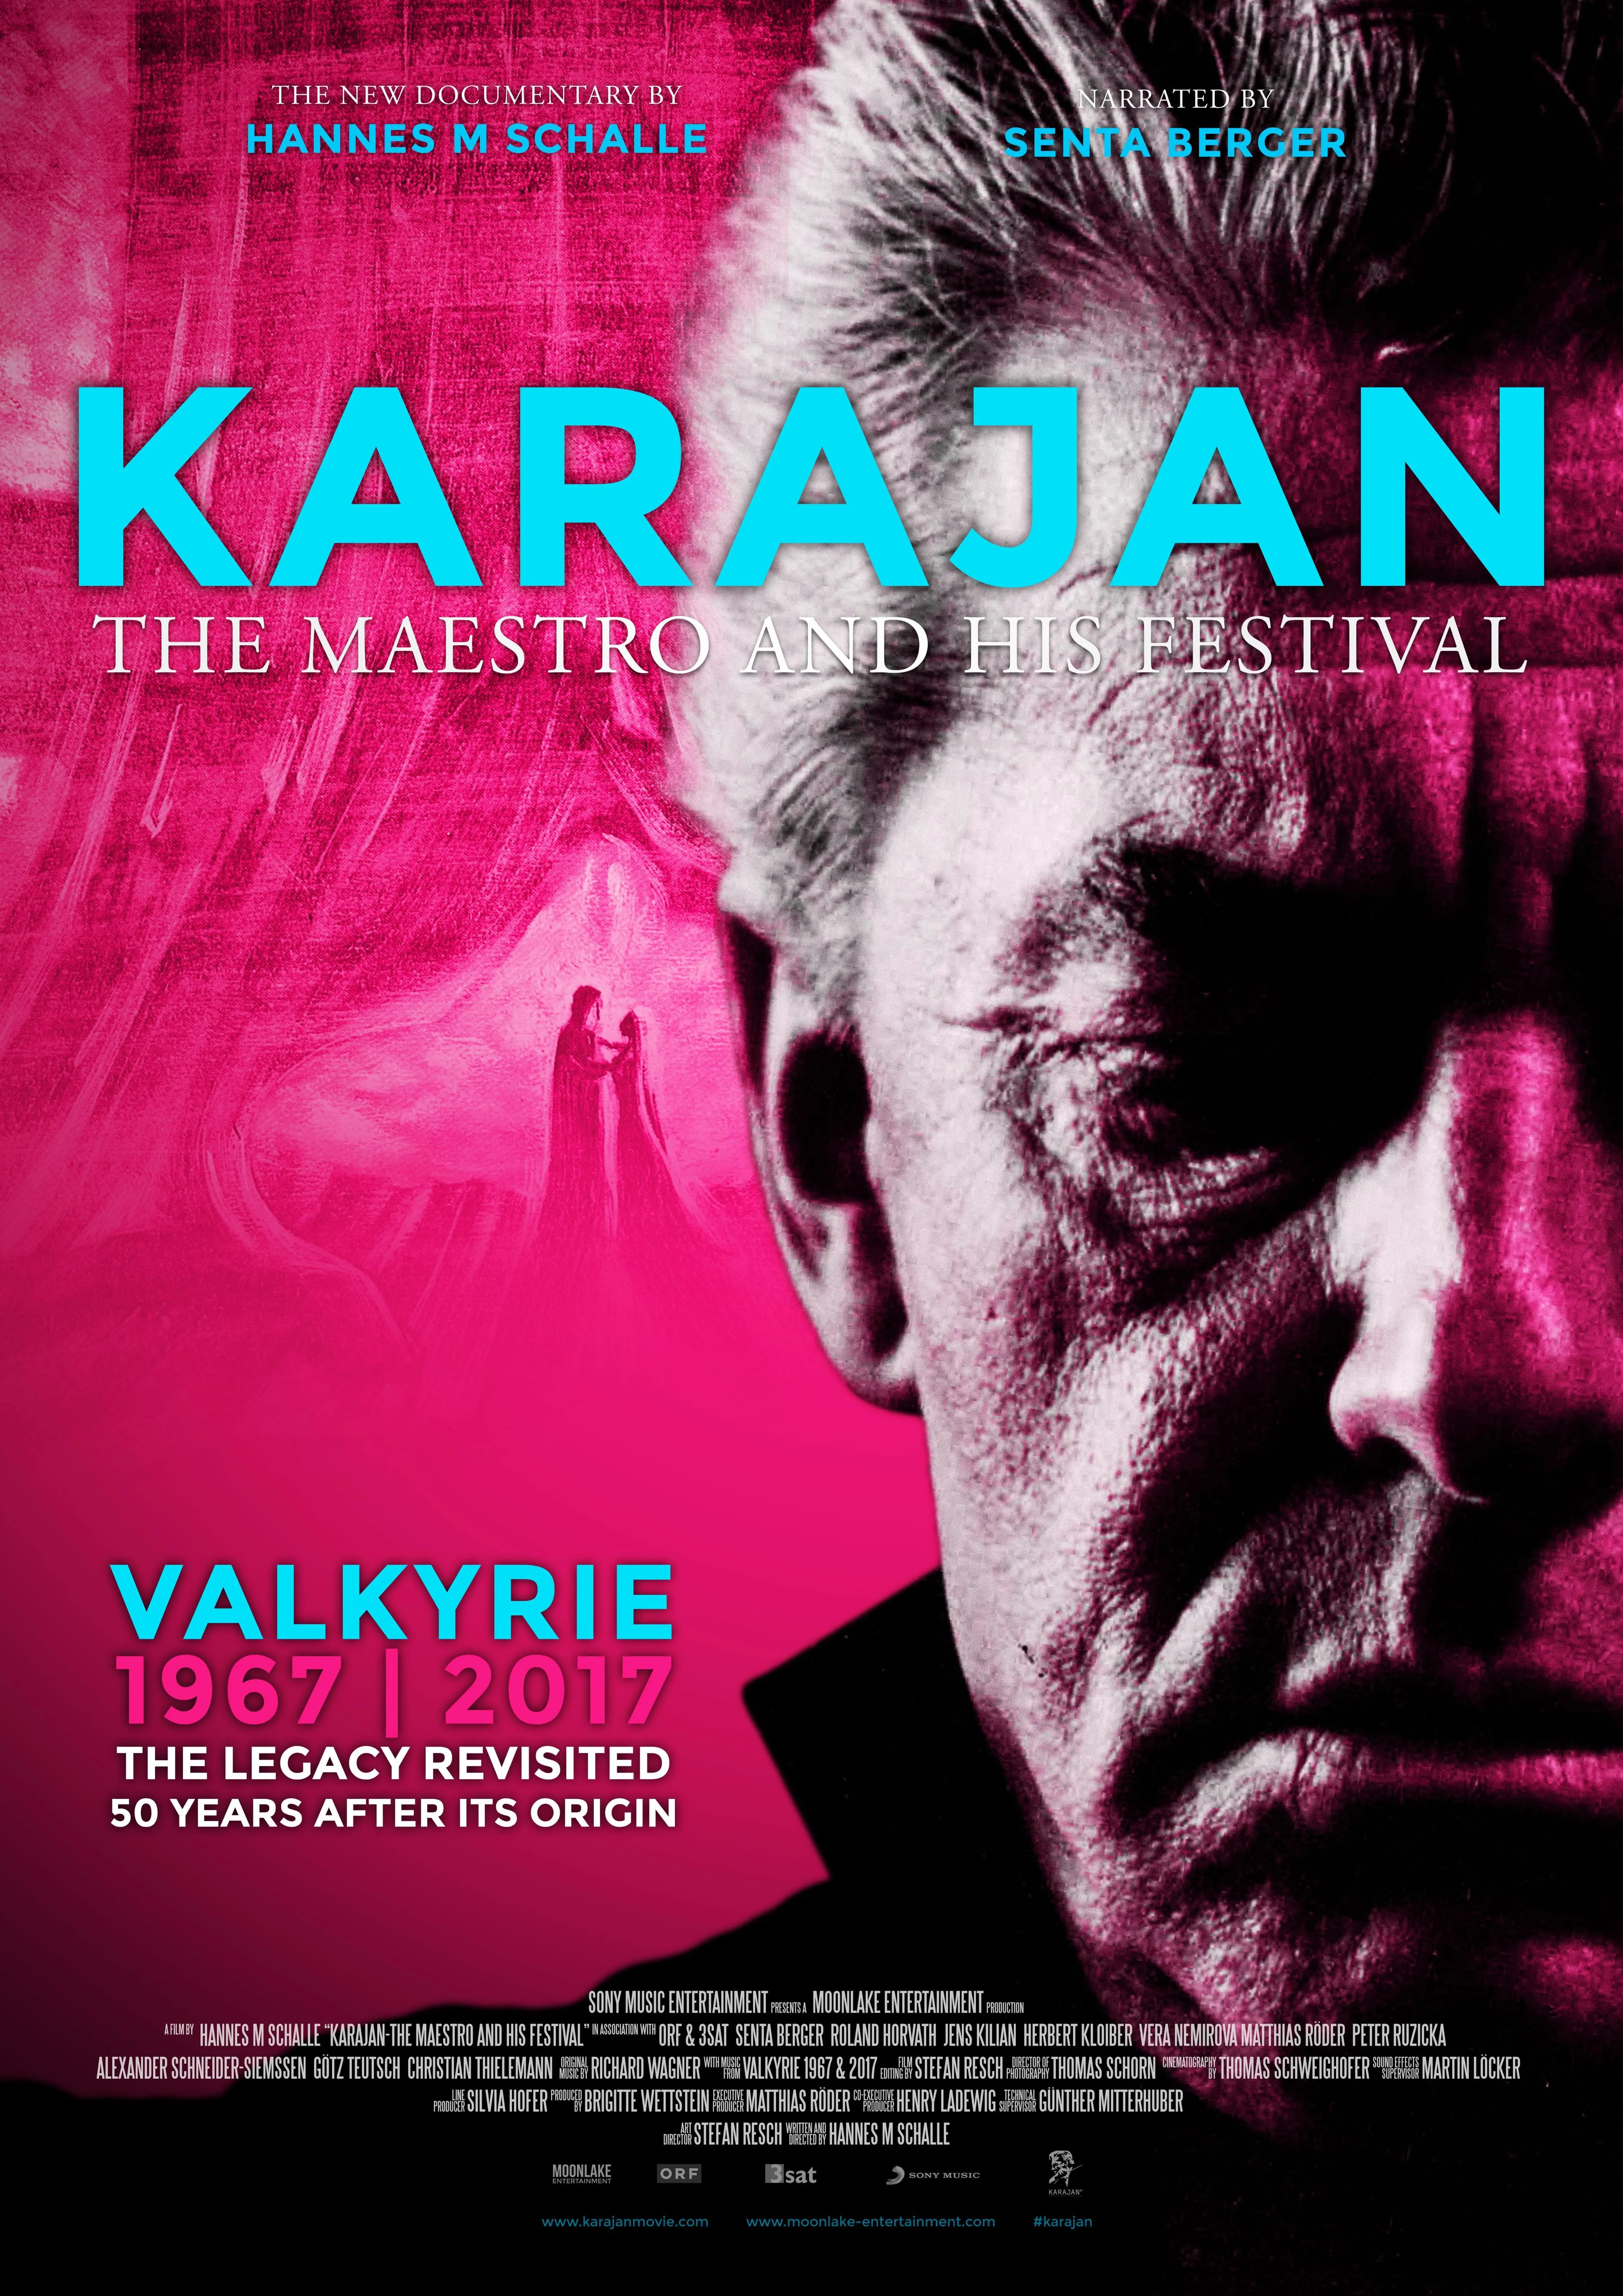     Karajan: the Maestro and His Festival